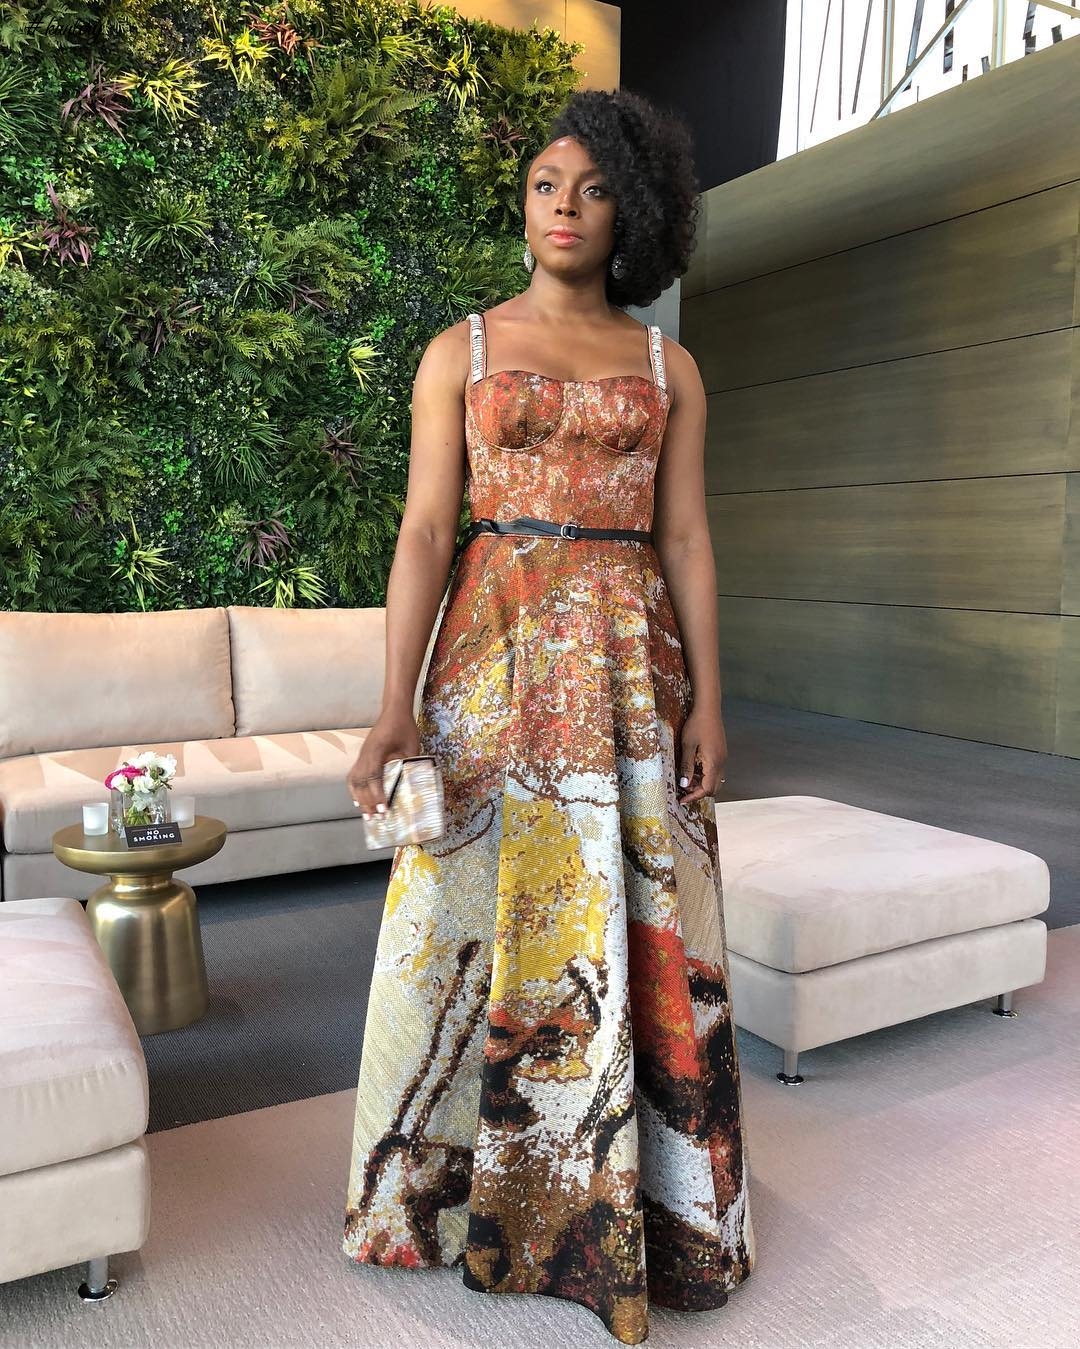 Runway To Real Life! Chimamanda Adichie In Dior For The Vanity Fair Oscar After Party